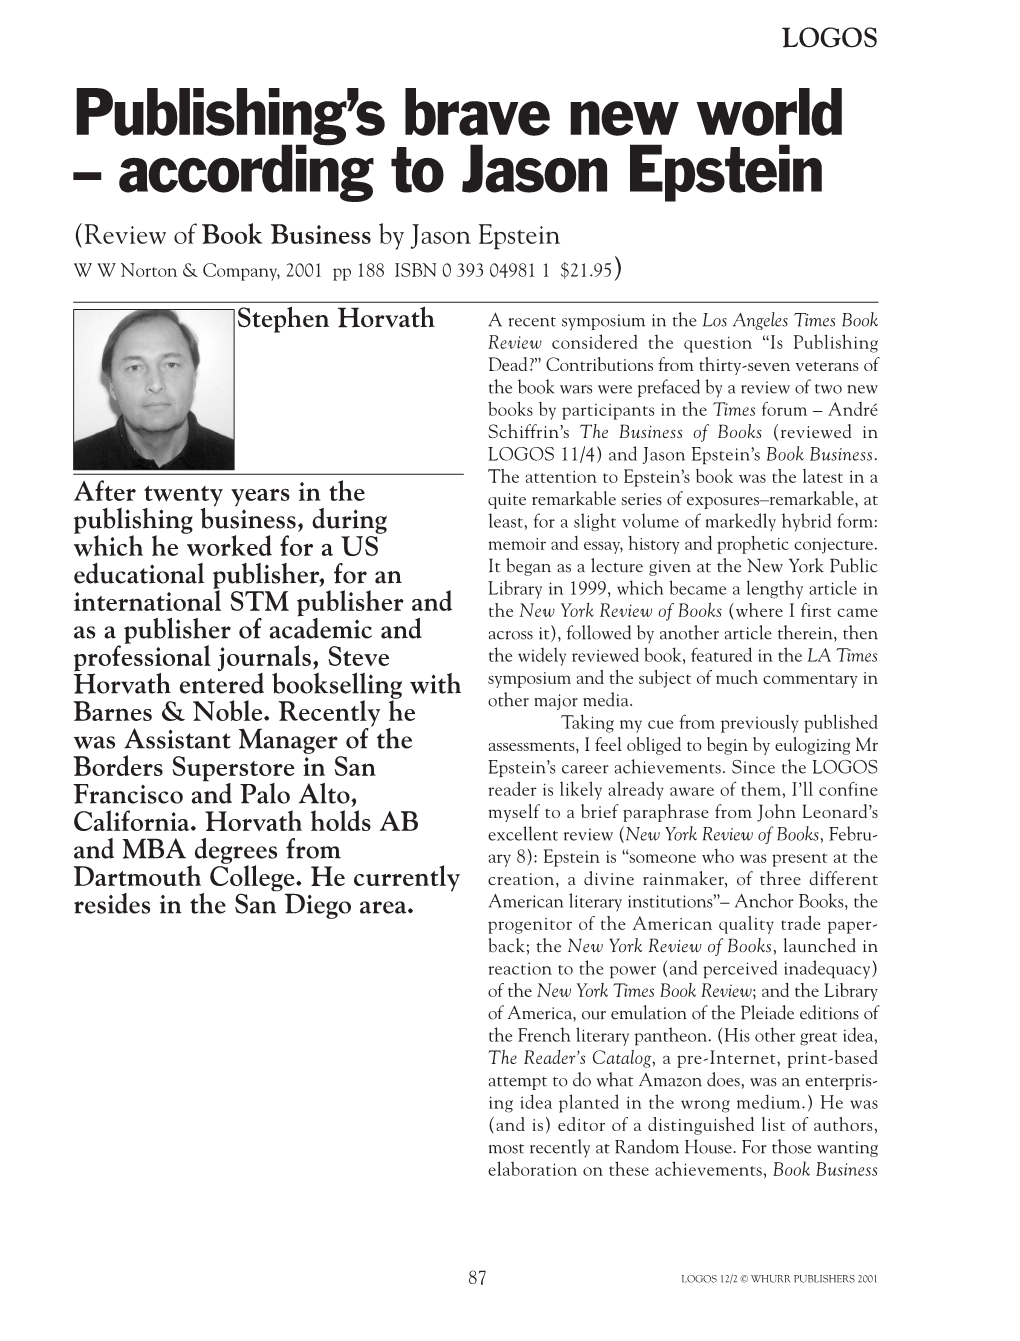 According to Jason Epstein (Review of Book Business by Jason Epstein W W Norton & Company, 2001 Pp 188 ISBN 0 393 04981 1 $21.95)